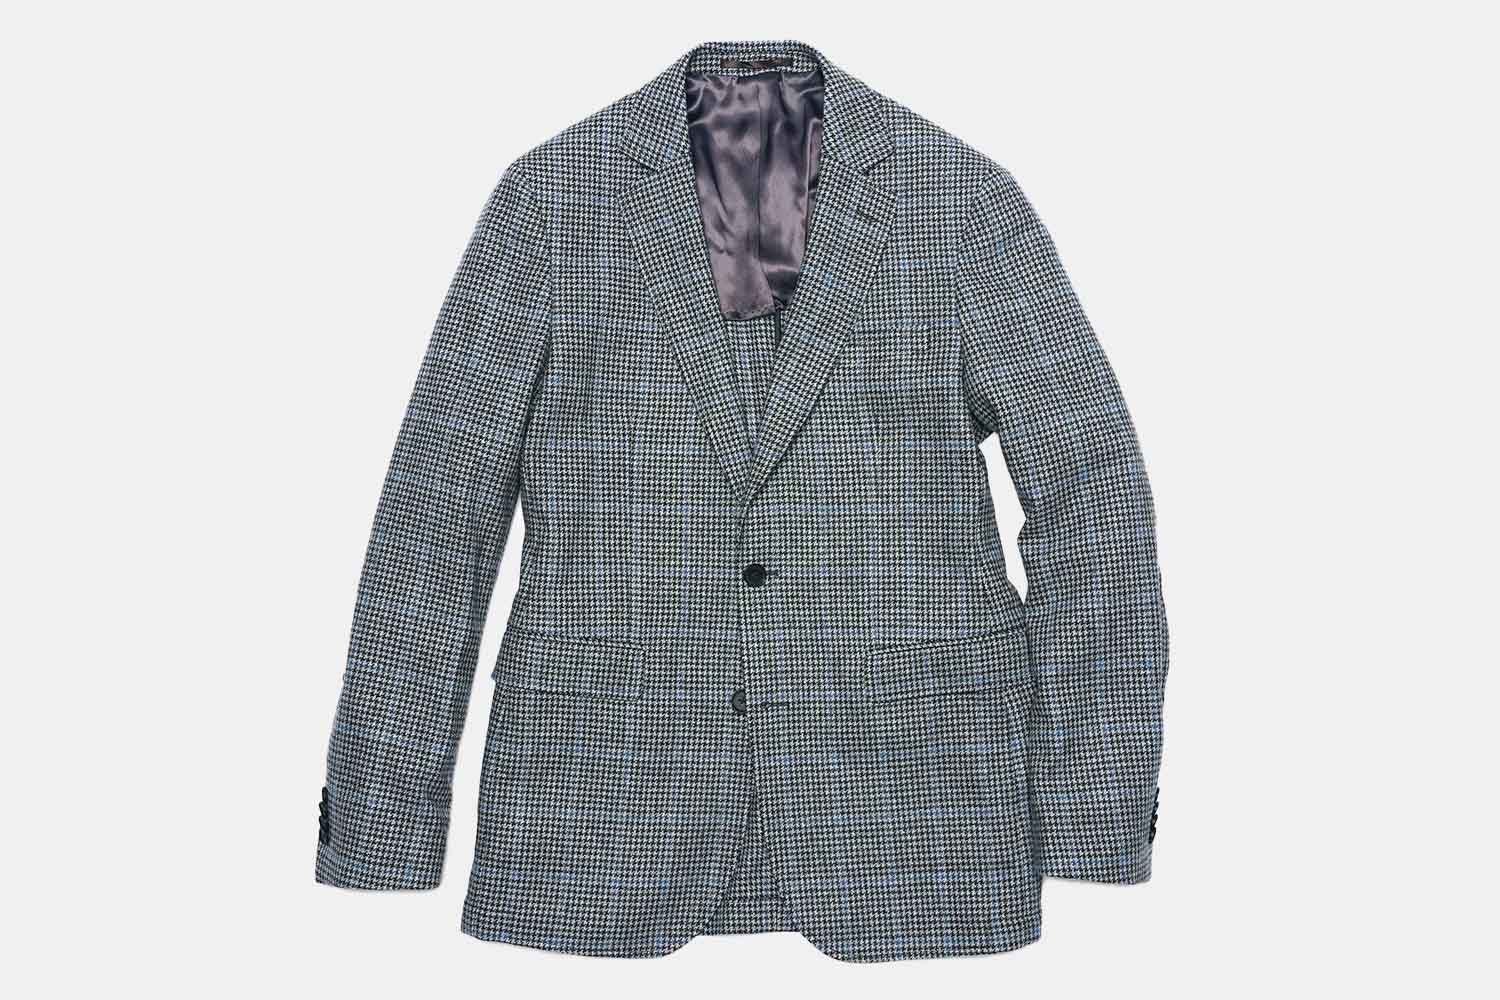 a grey sports coat from Tie Bar